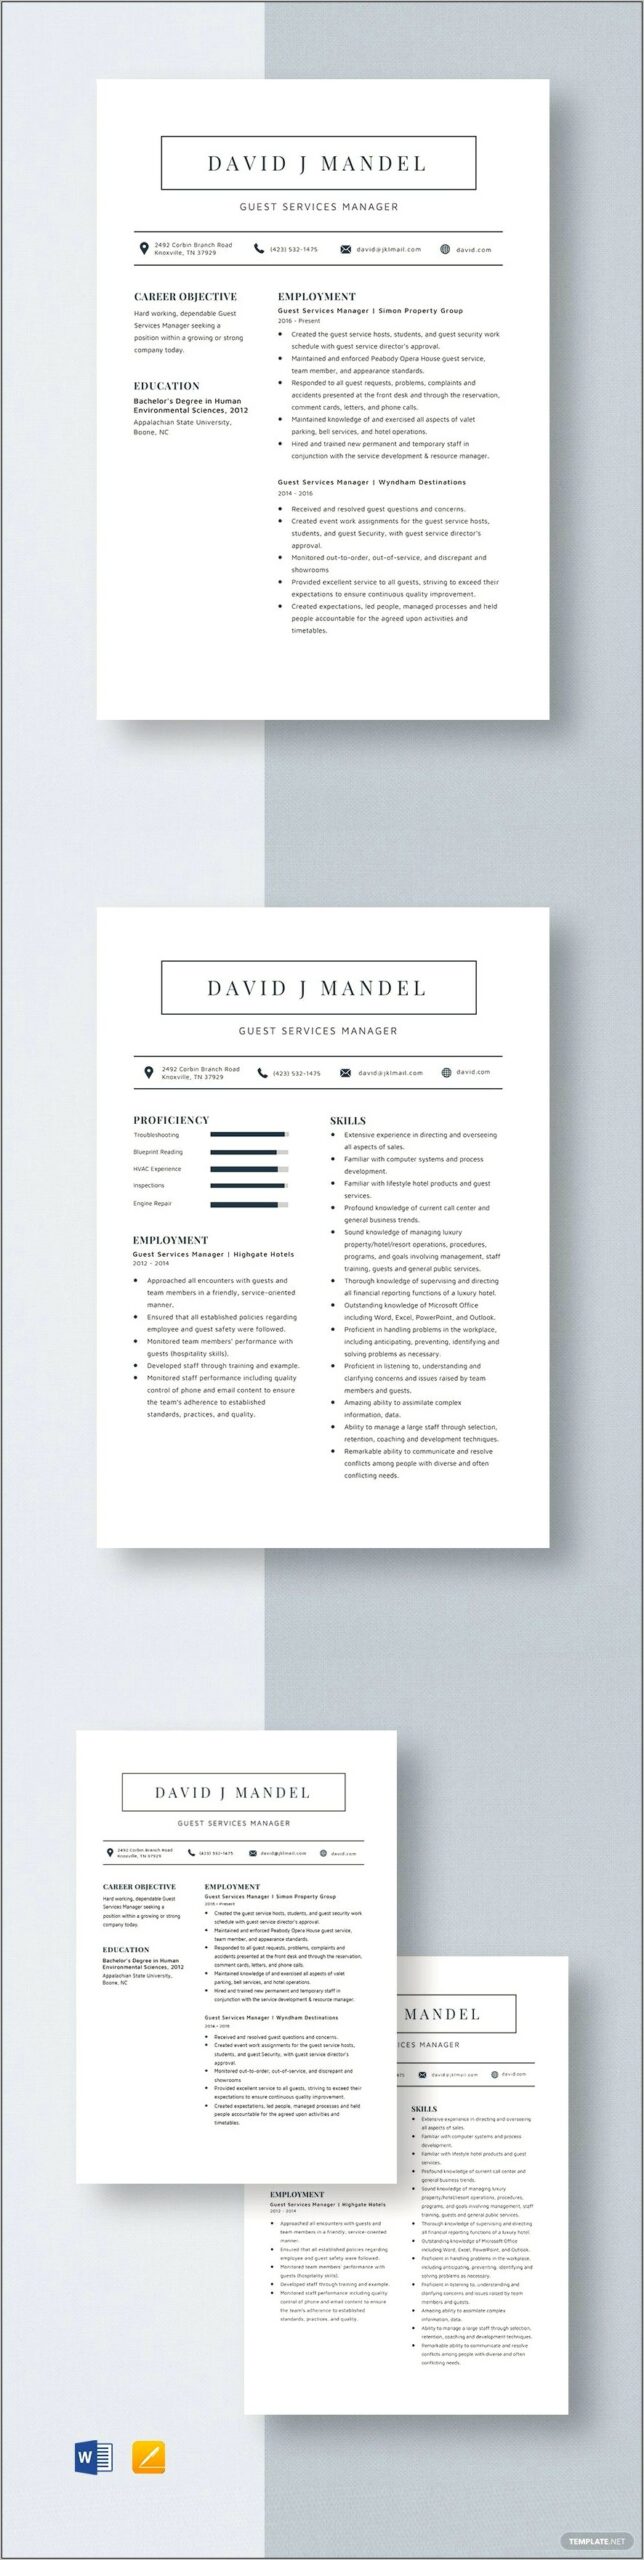 Environmental Services Manager Resume Sample